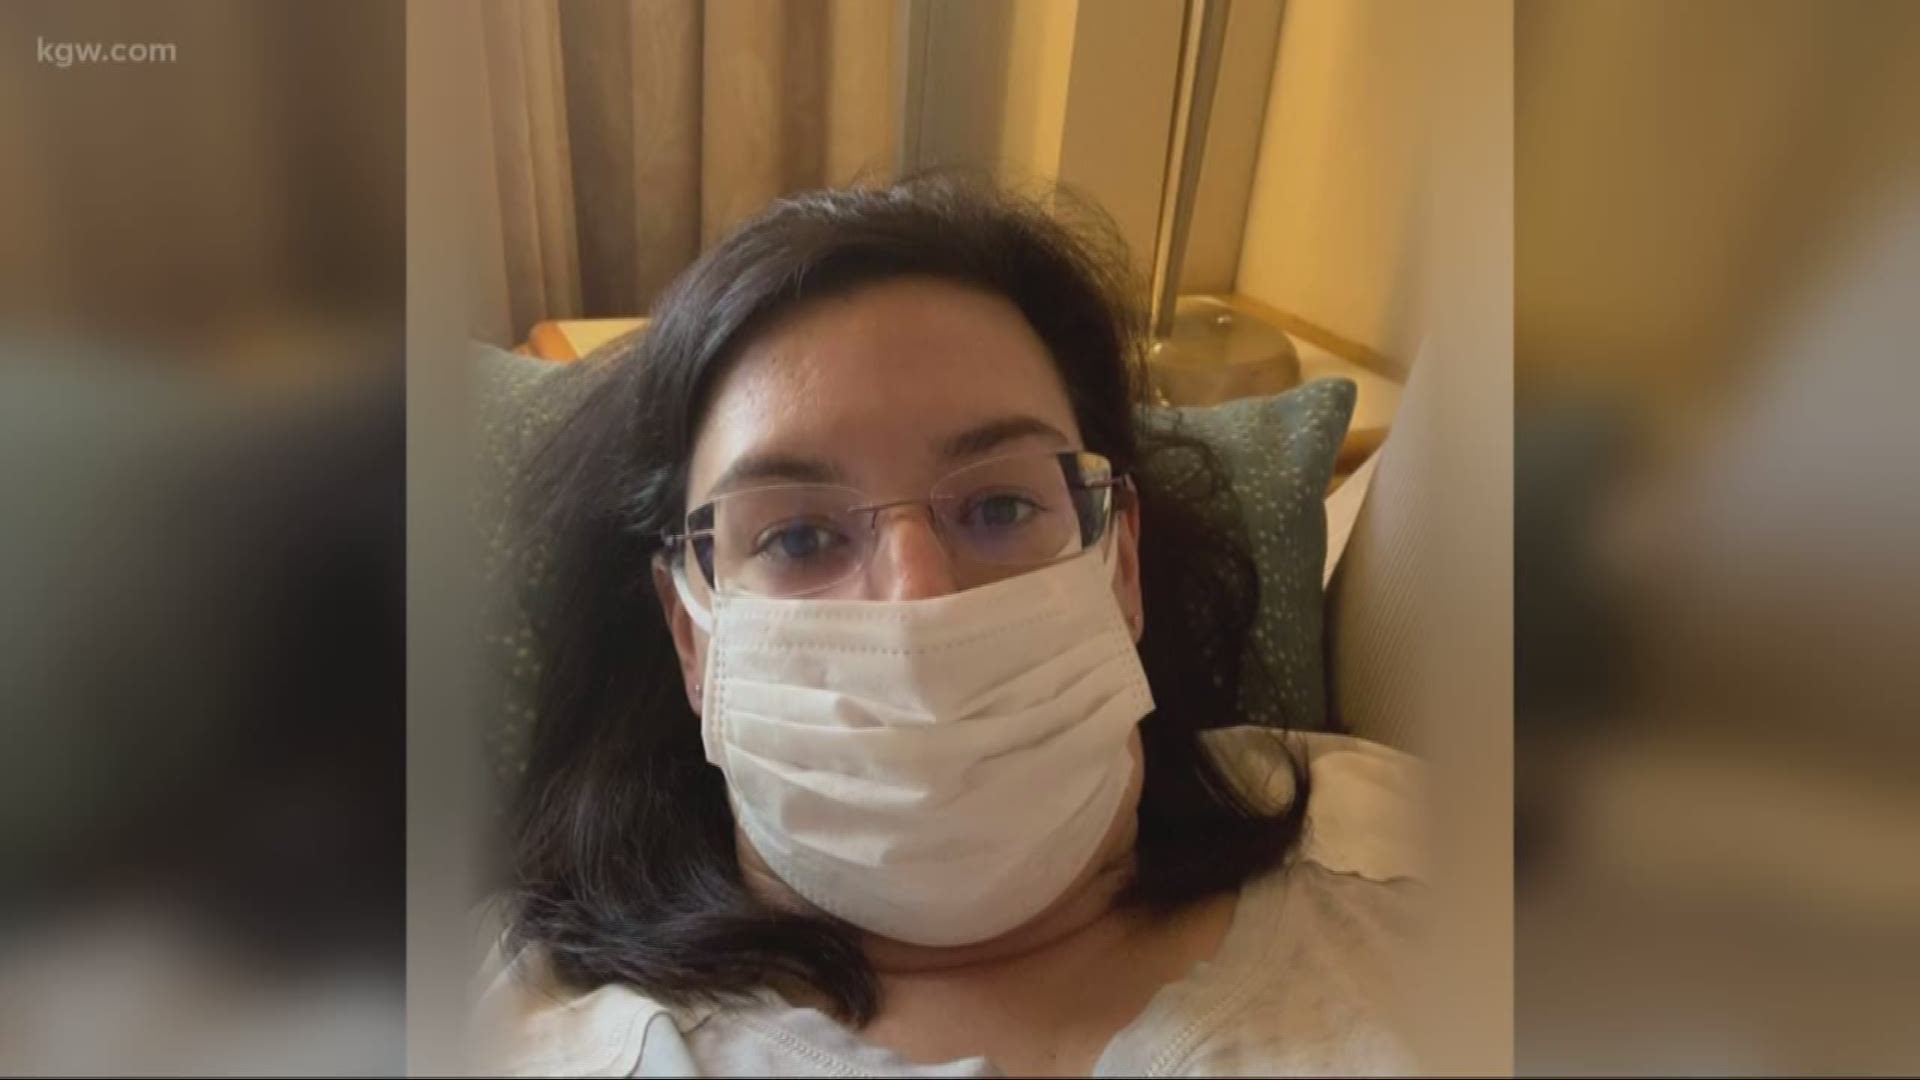 A Forest Grove woman is one of 41 people confirmed to have coronavirus on a cruise ship in Japan.